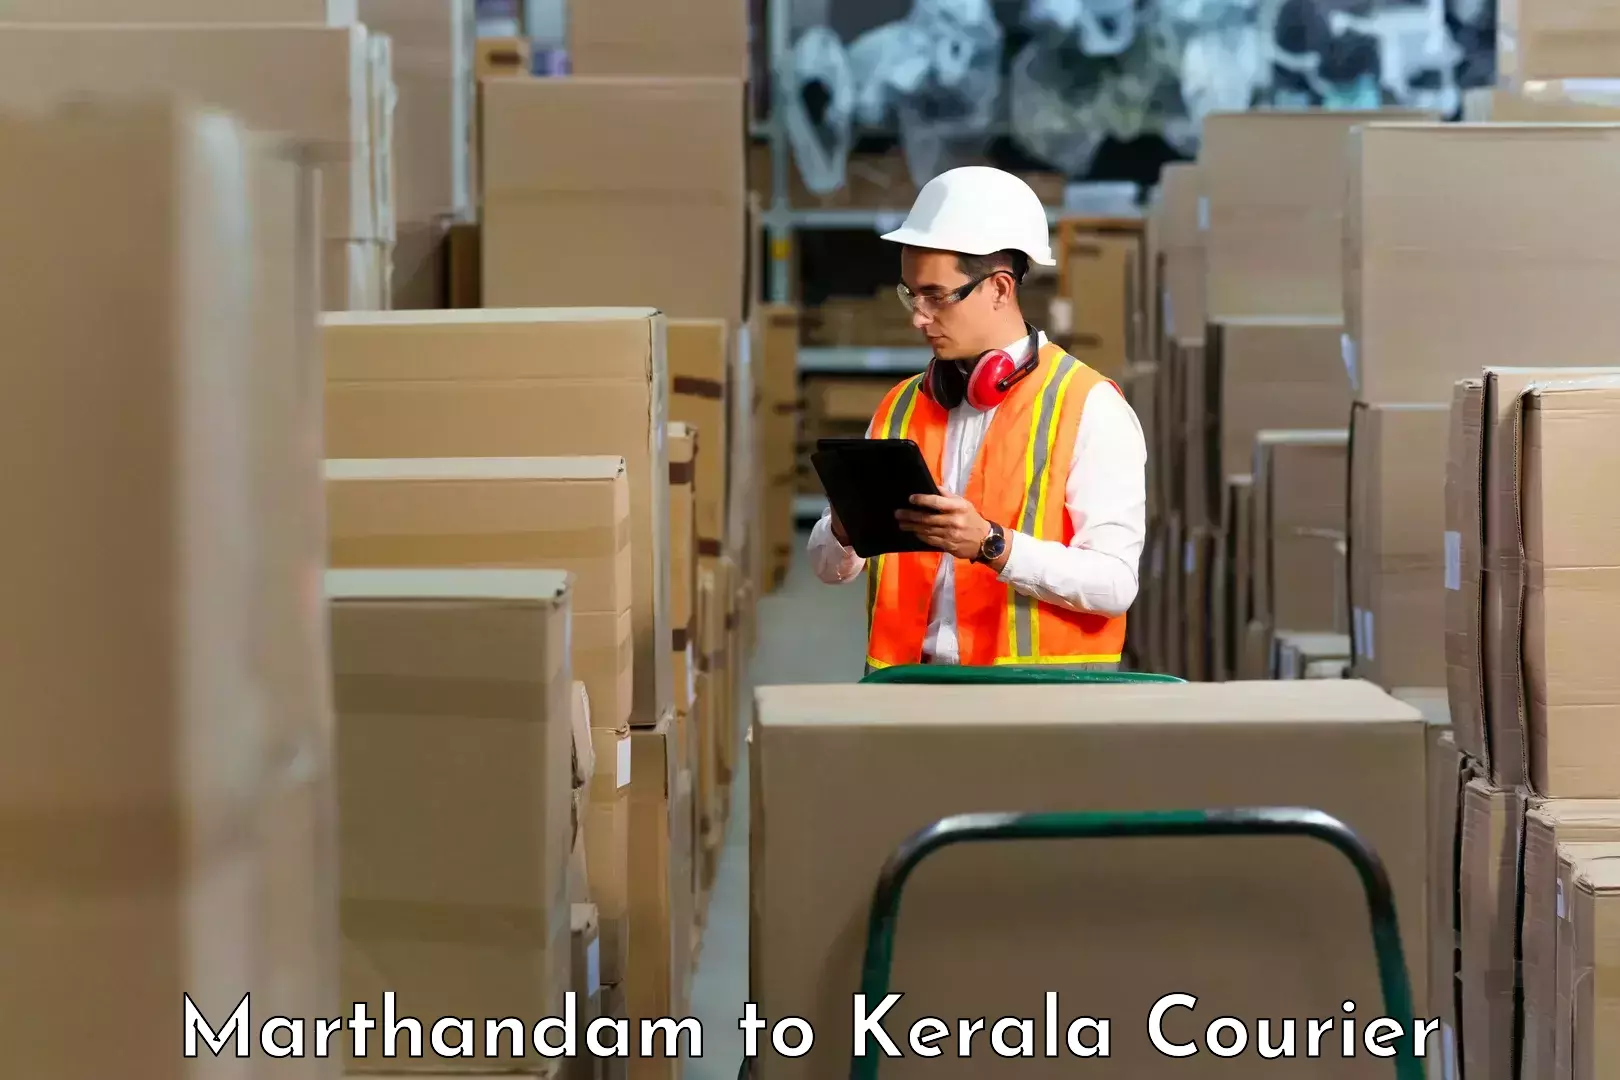 Personal courier services in Marthandam to Nallepilly